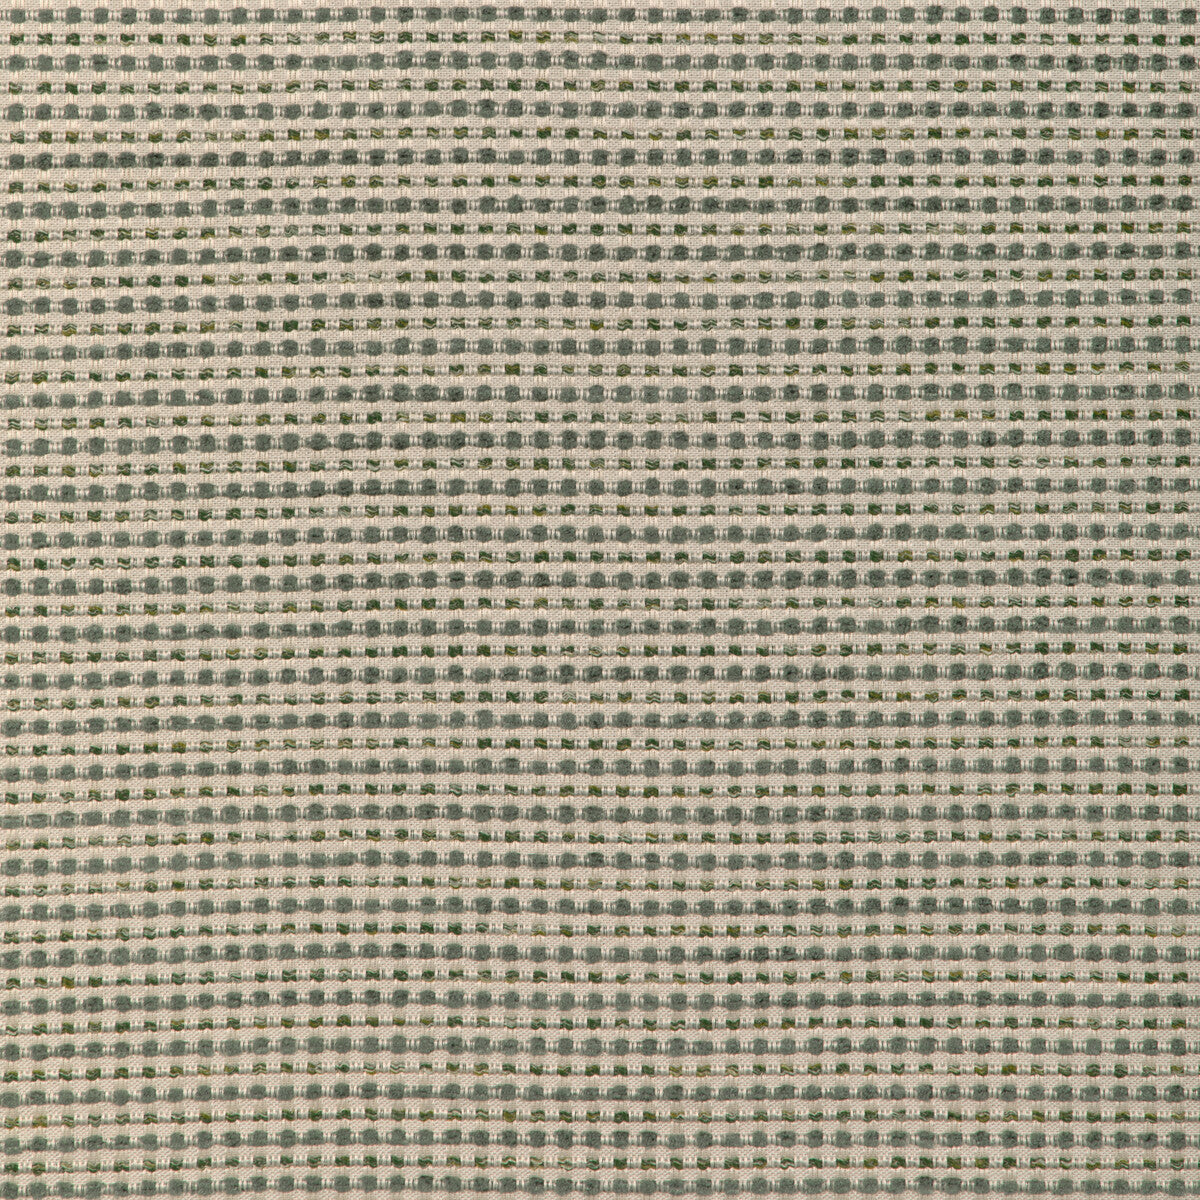 Kravet Design fabric in 37175-13 color - pattern 37175.13.0 - by Kravet Design in the Woven Colors collection